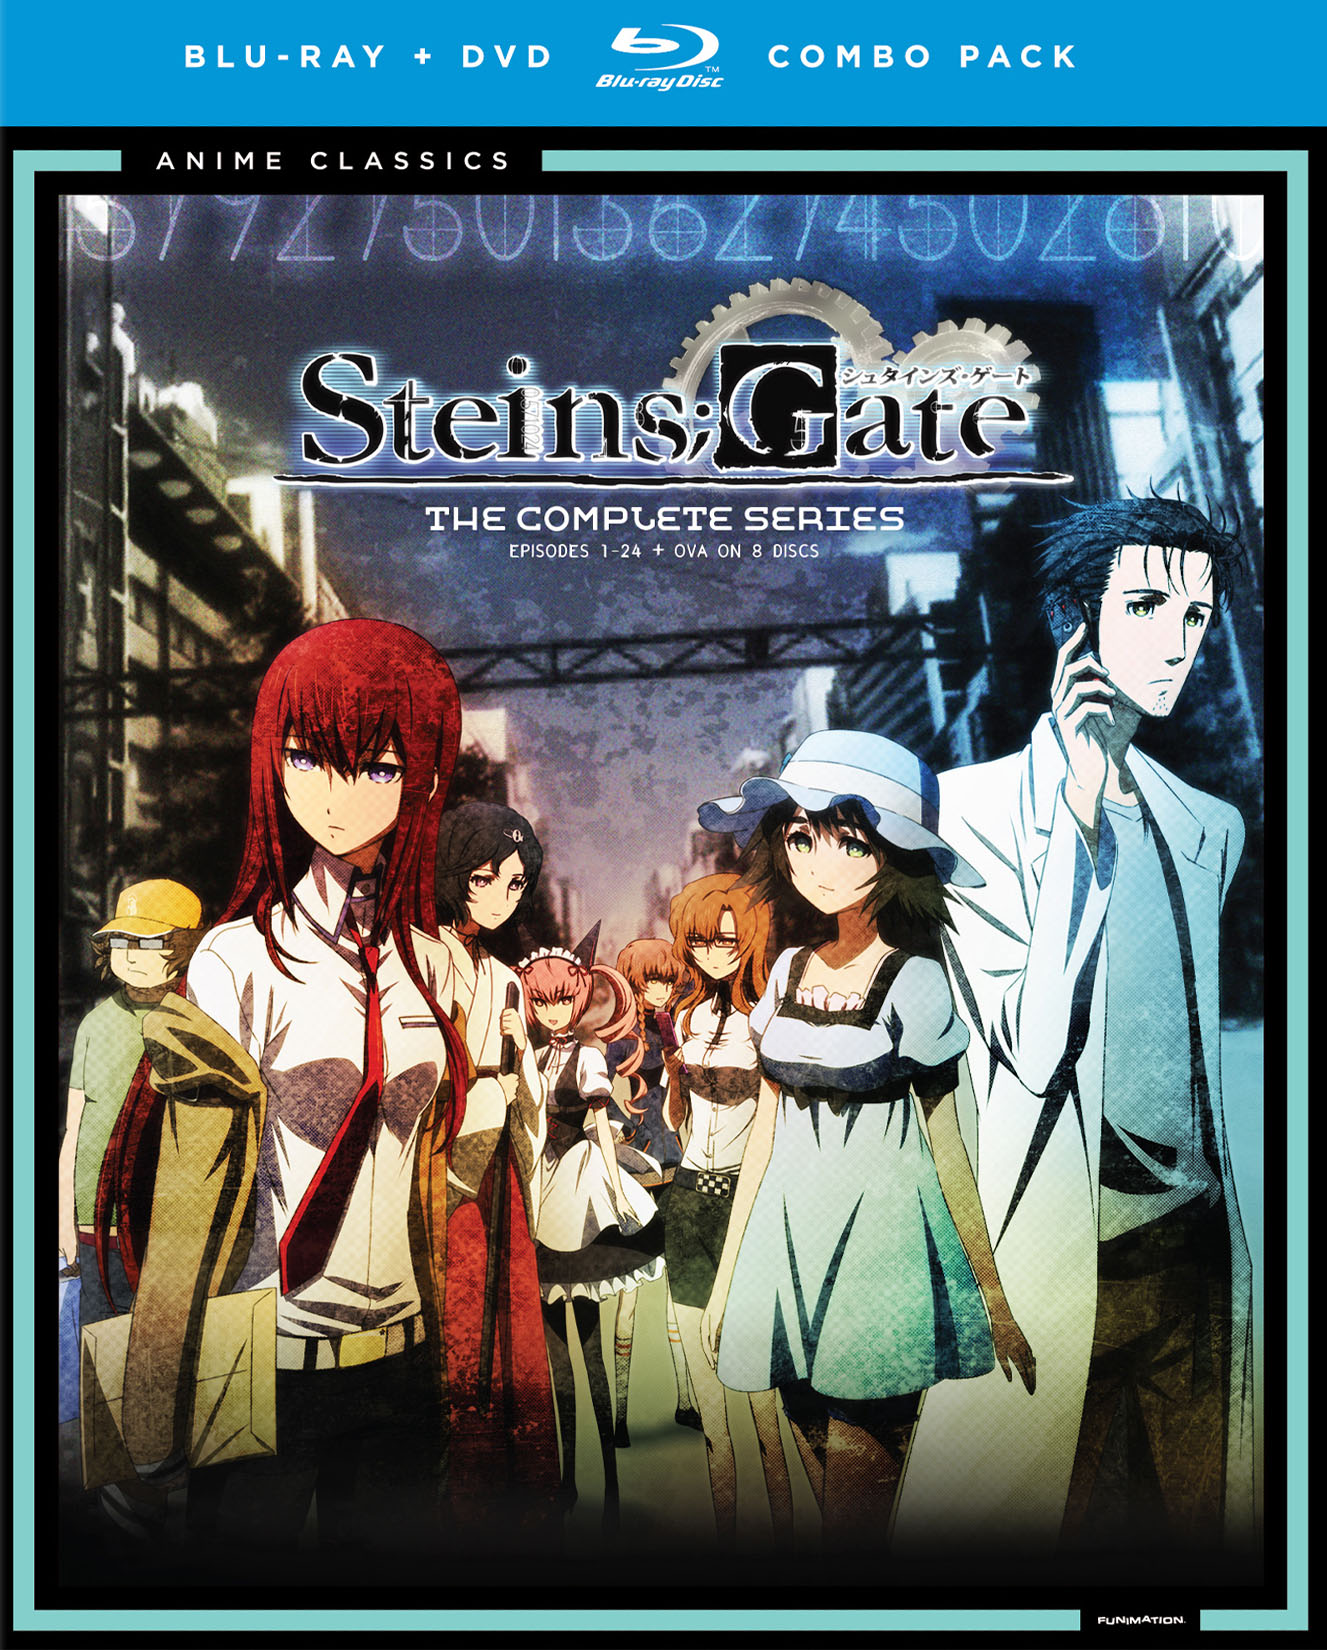 Best Buy: Steins;Gate: The Complete Series [8 Discs] [Blu-ray/DVD]